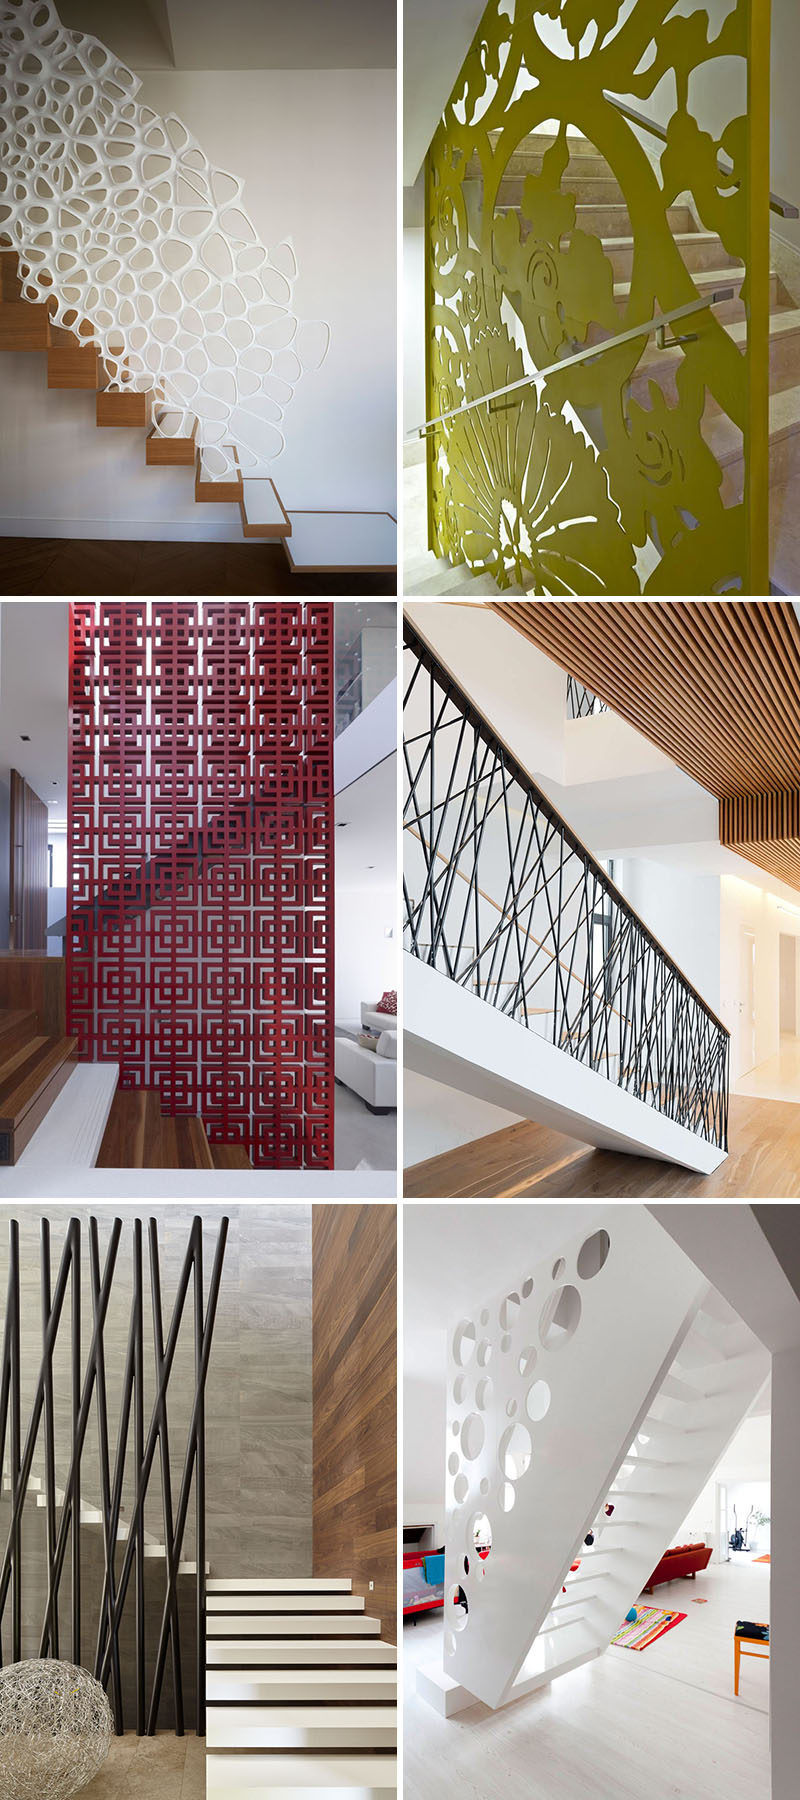 Here are 11 examples of creative safety railings on stairs that show how railings don't have to be boring and can be the focal point in a house.